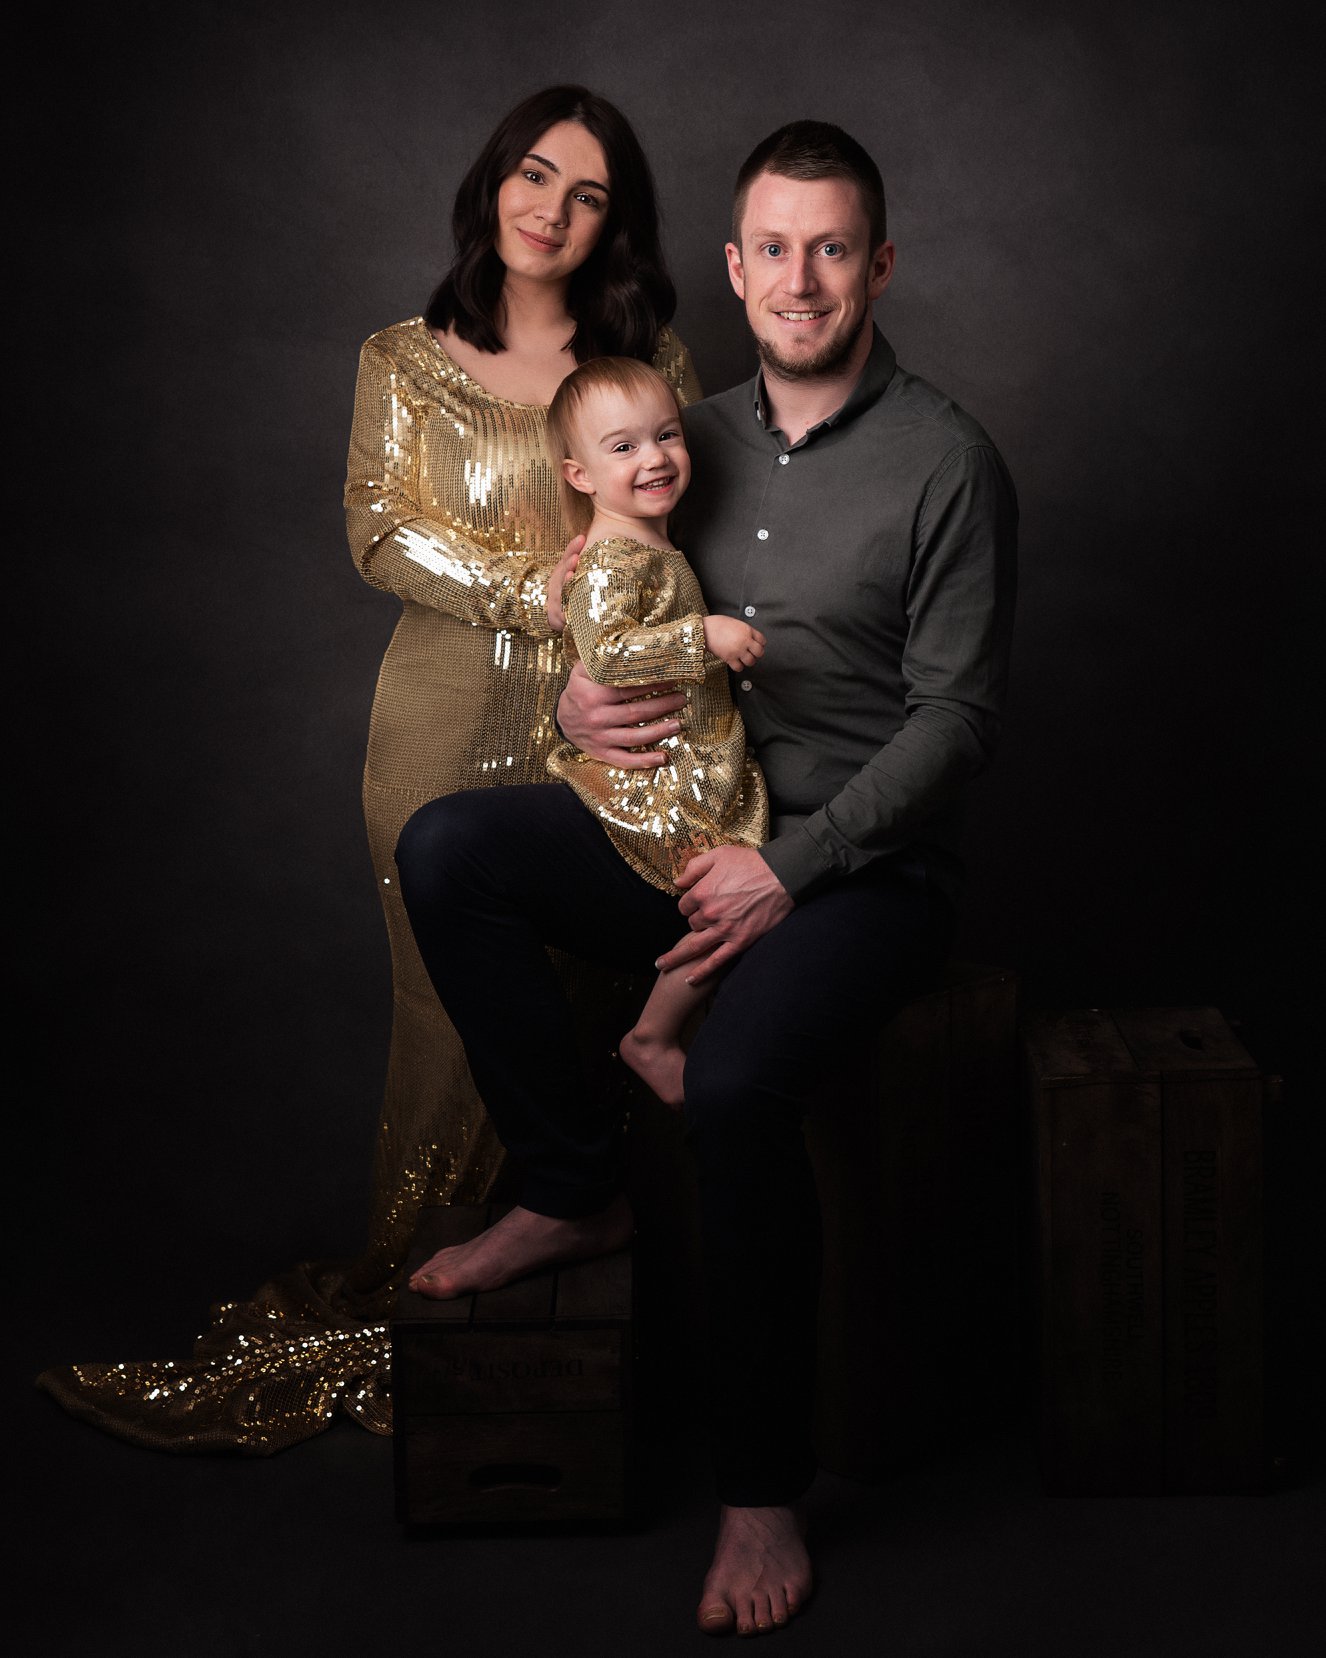 Famiy with young baby by family photographer in preston Lancashire